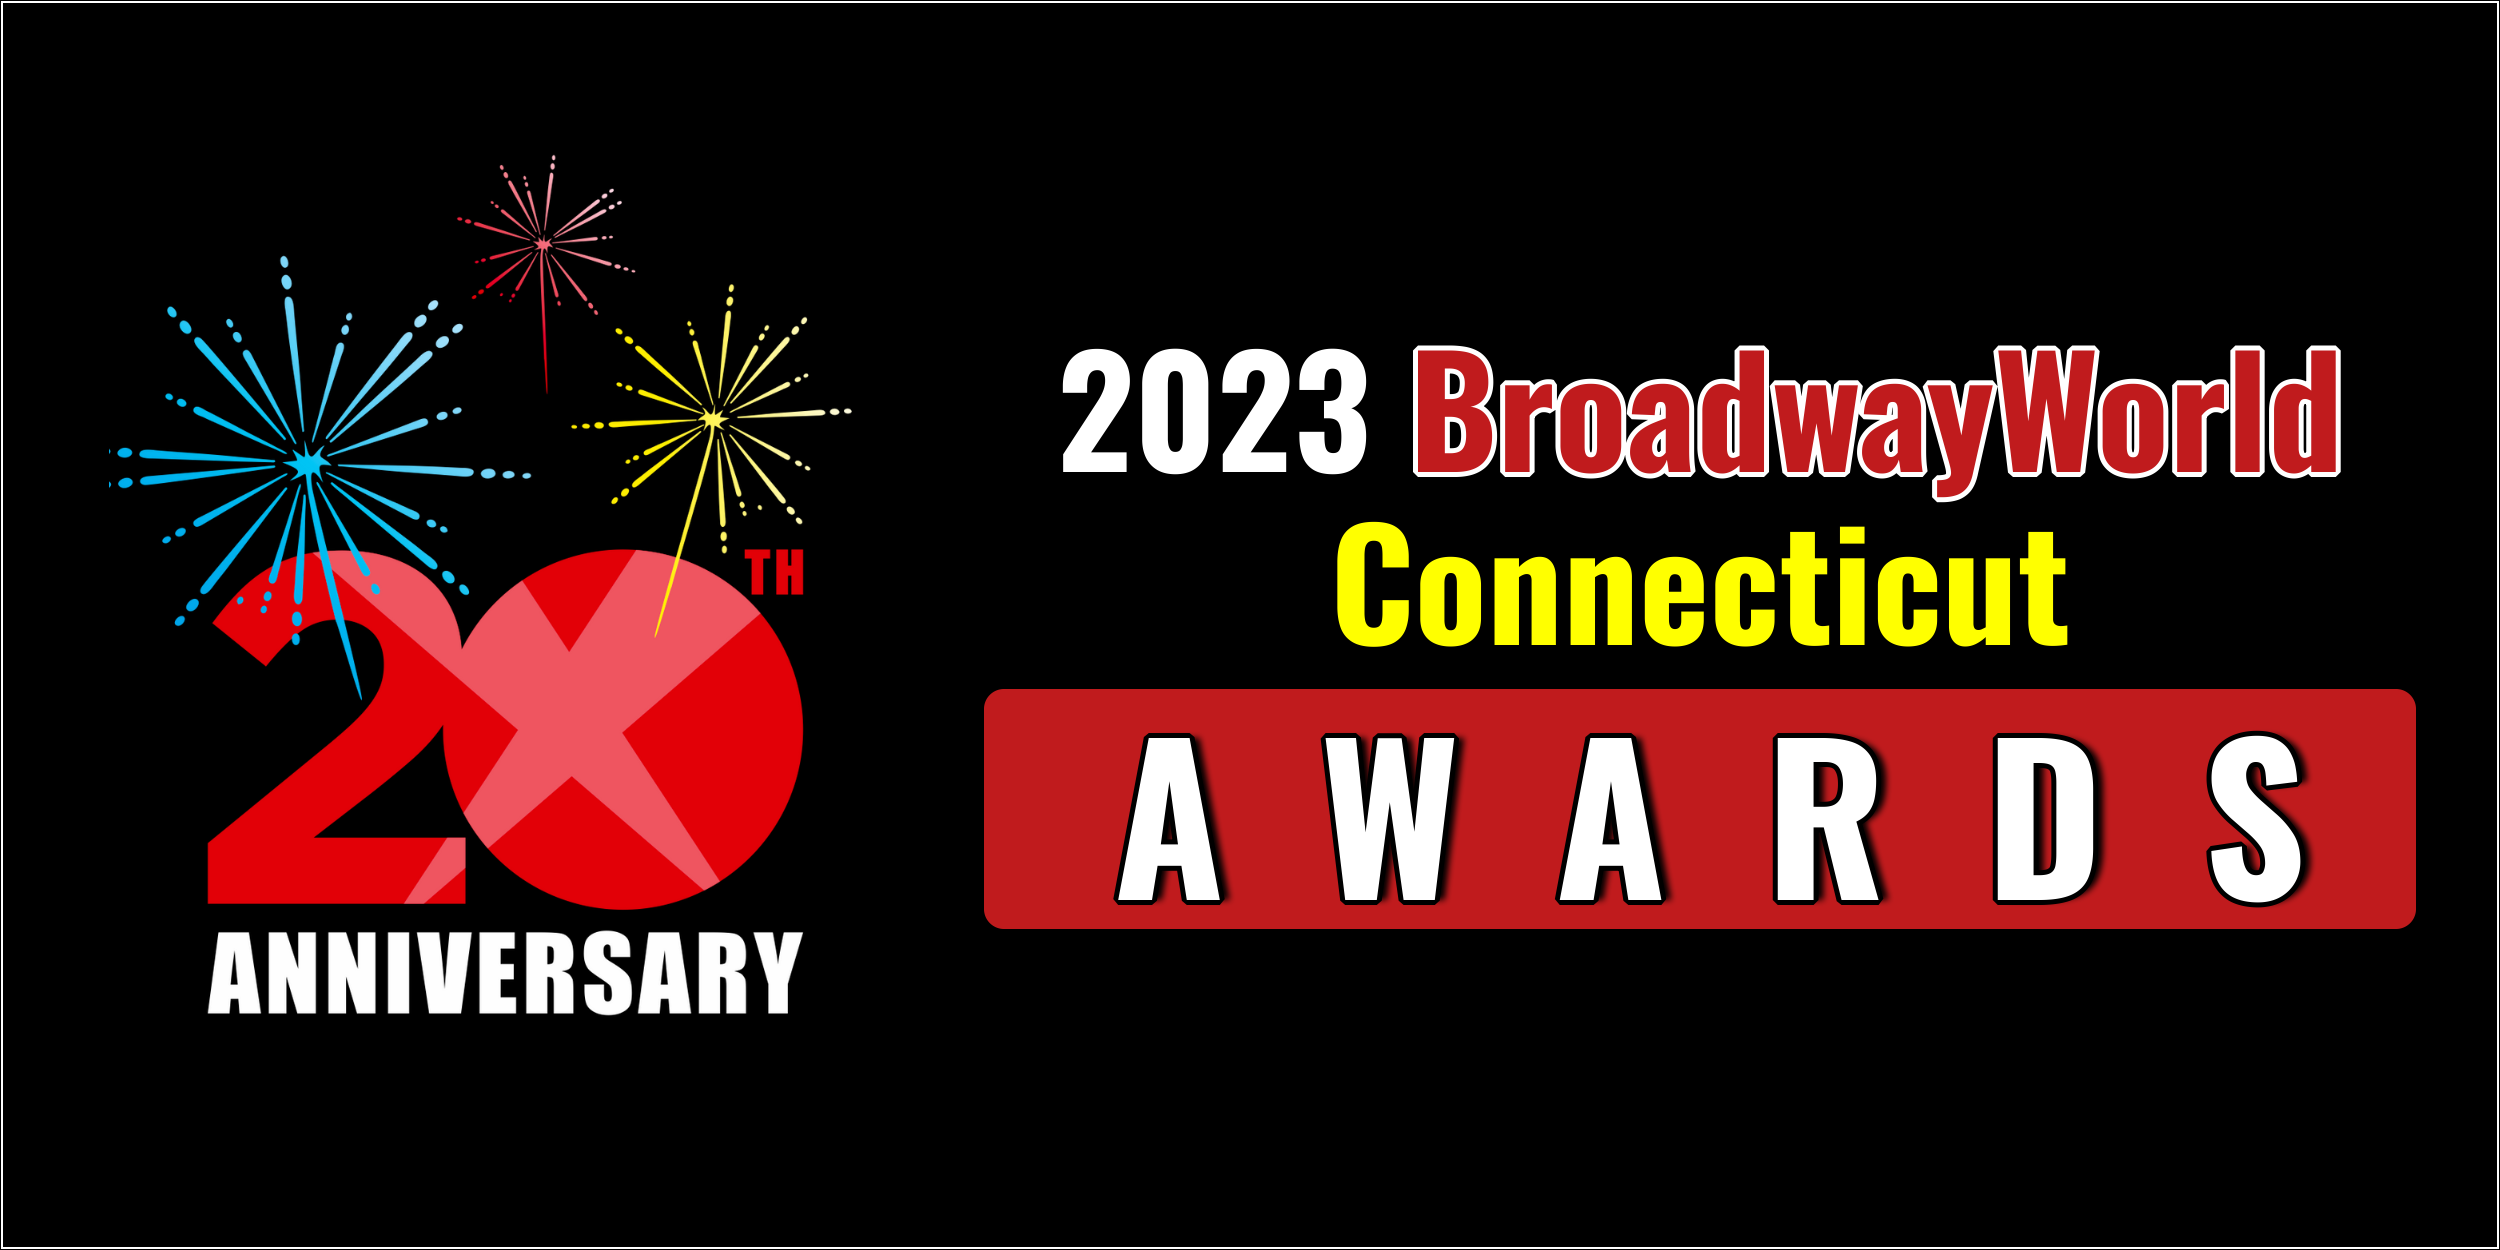 BroadwayWorld Connecticut Awards December 5th Standings;  Leads Favorite Local Theatre! 